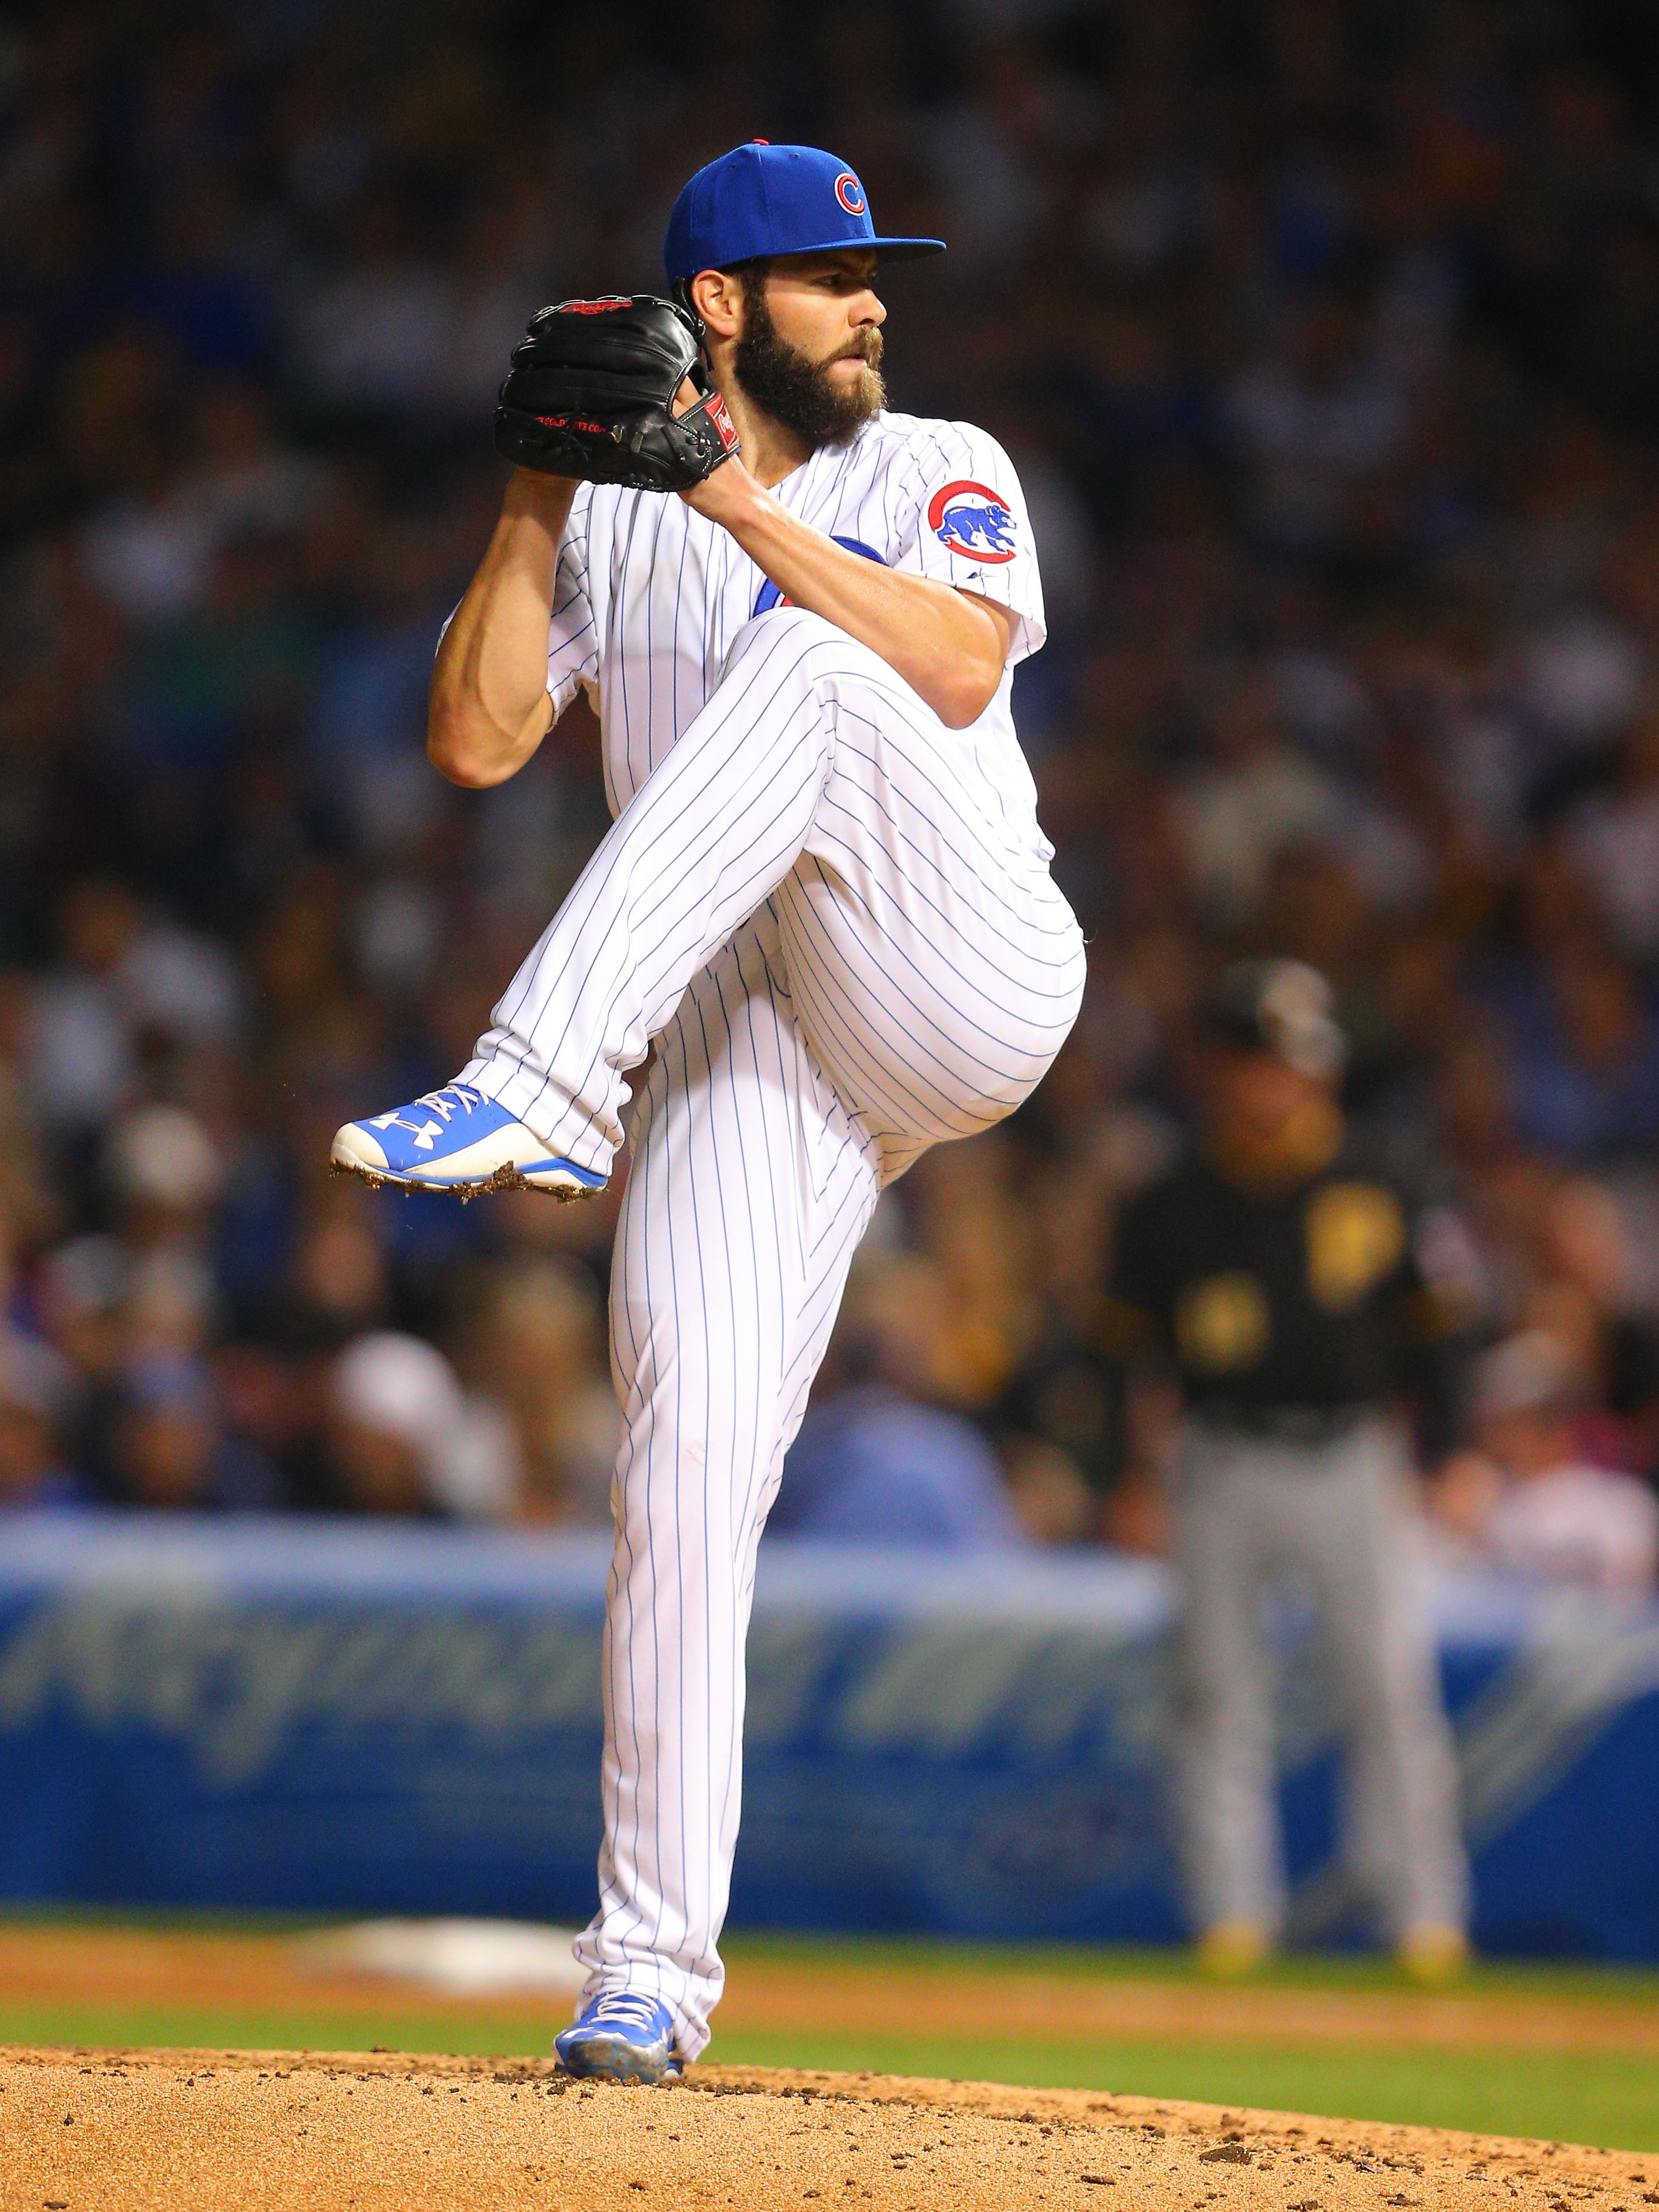 Pirates will have hands full facing Cubs' Jake Arrieta - The Boston Globe